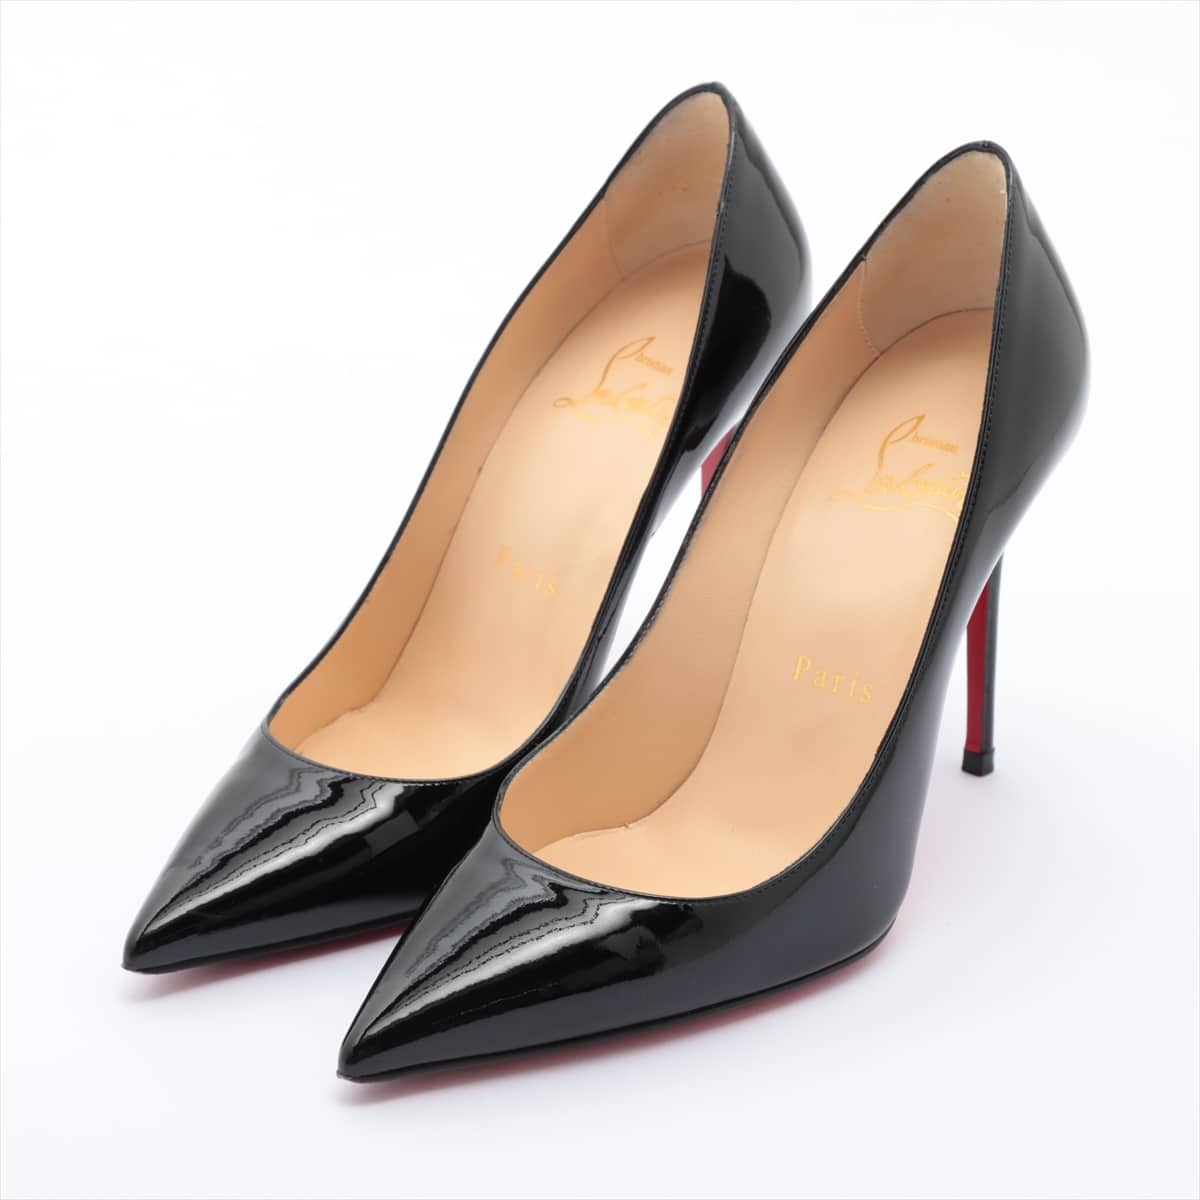 Christian Louboutin Patent leather Pumps 35 Ladies' Black Pointed toe